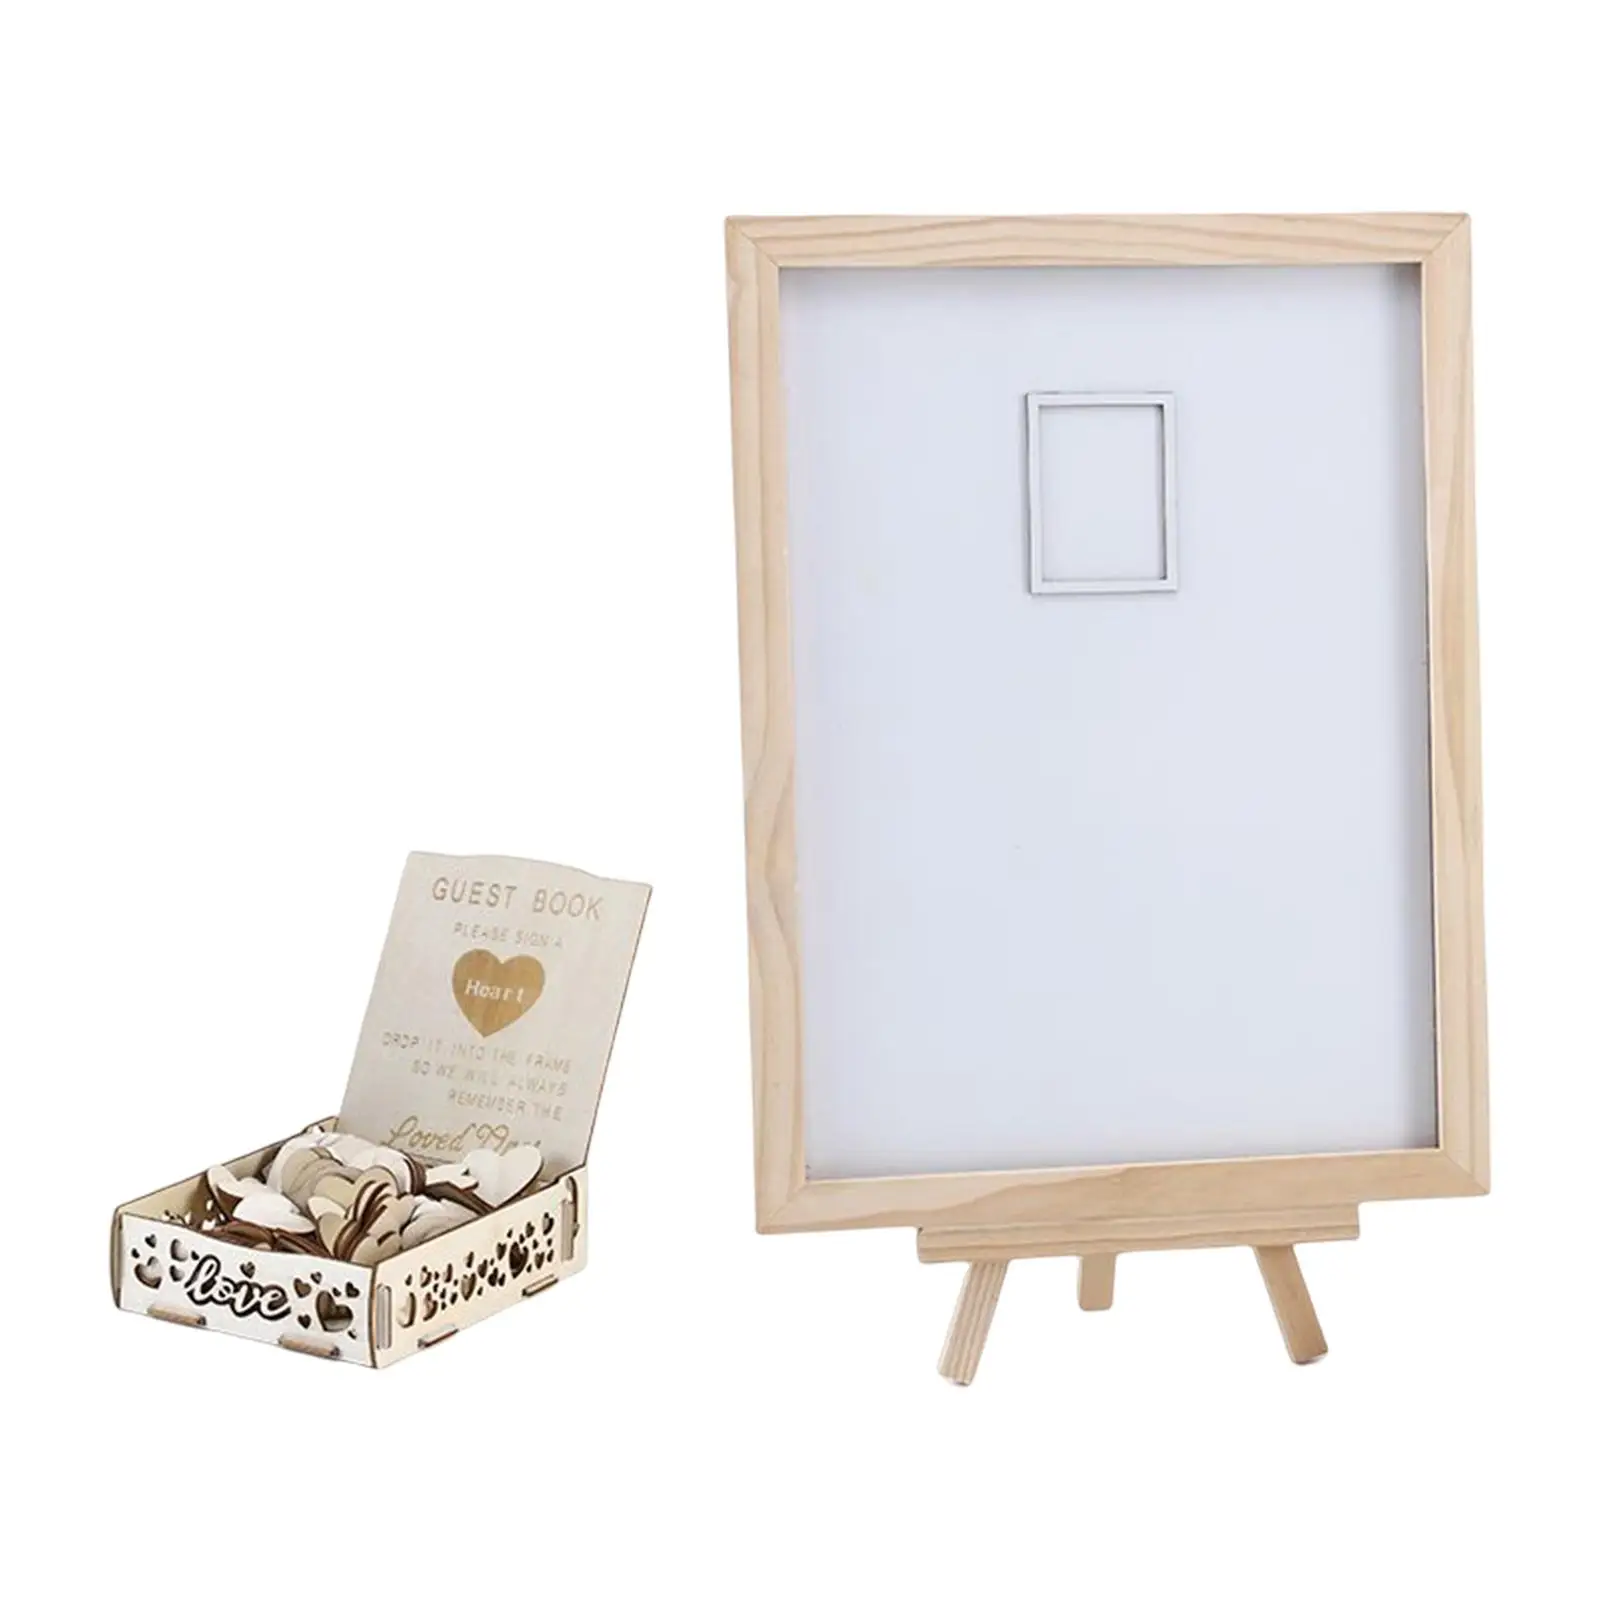 Creative Wedding Guest Book Drop Box Guestbook for Reception Decoration